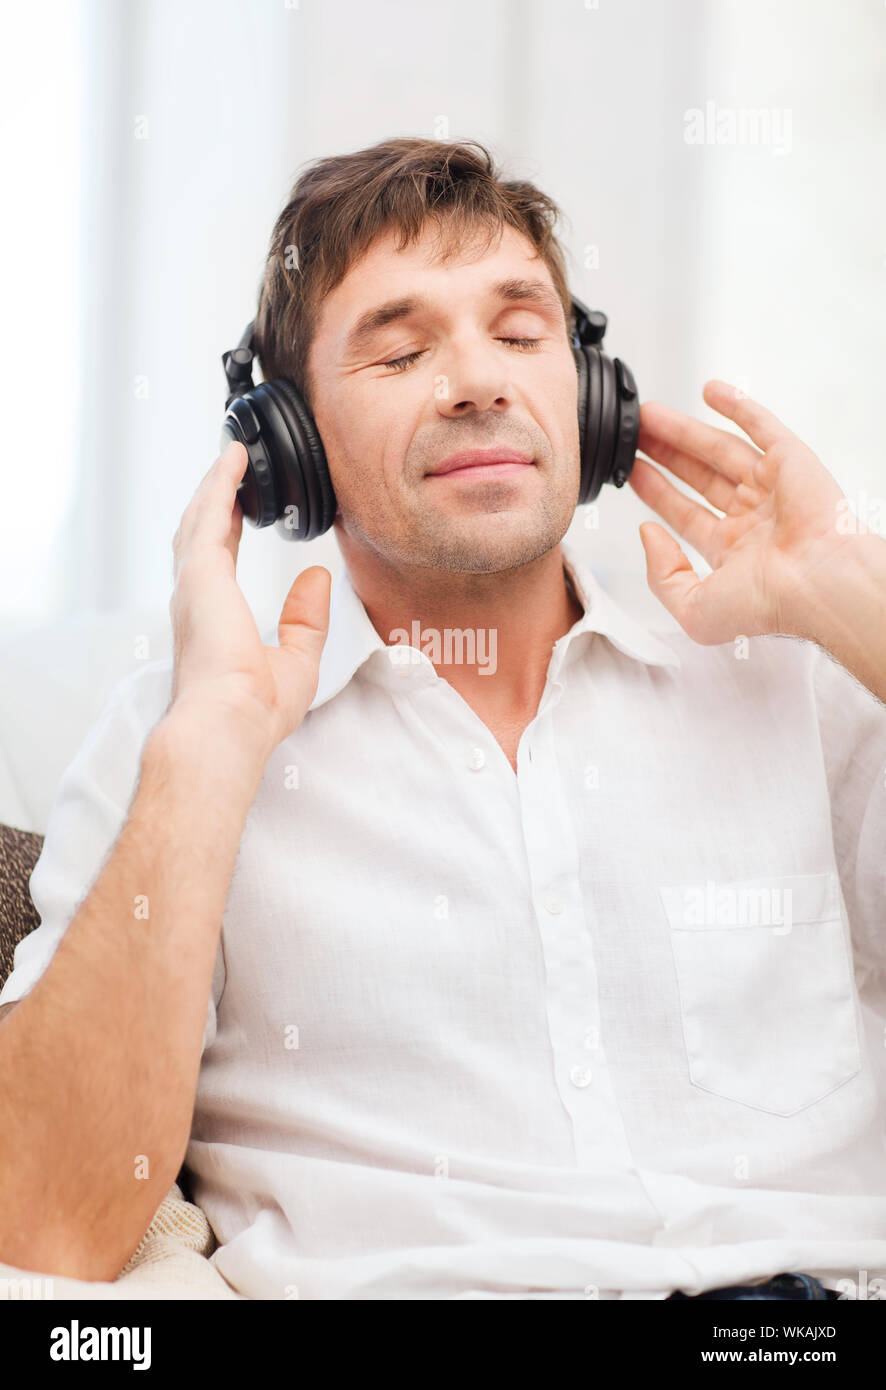 leisure and lifestyle concept - happy man with headphones listening to music at home Stock Photo